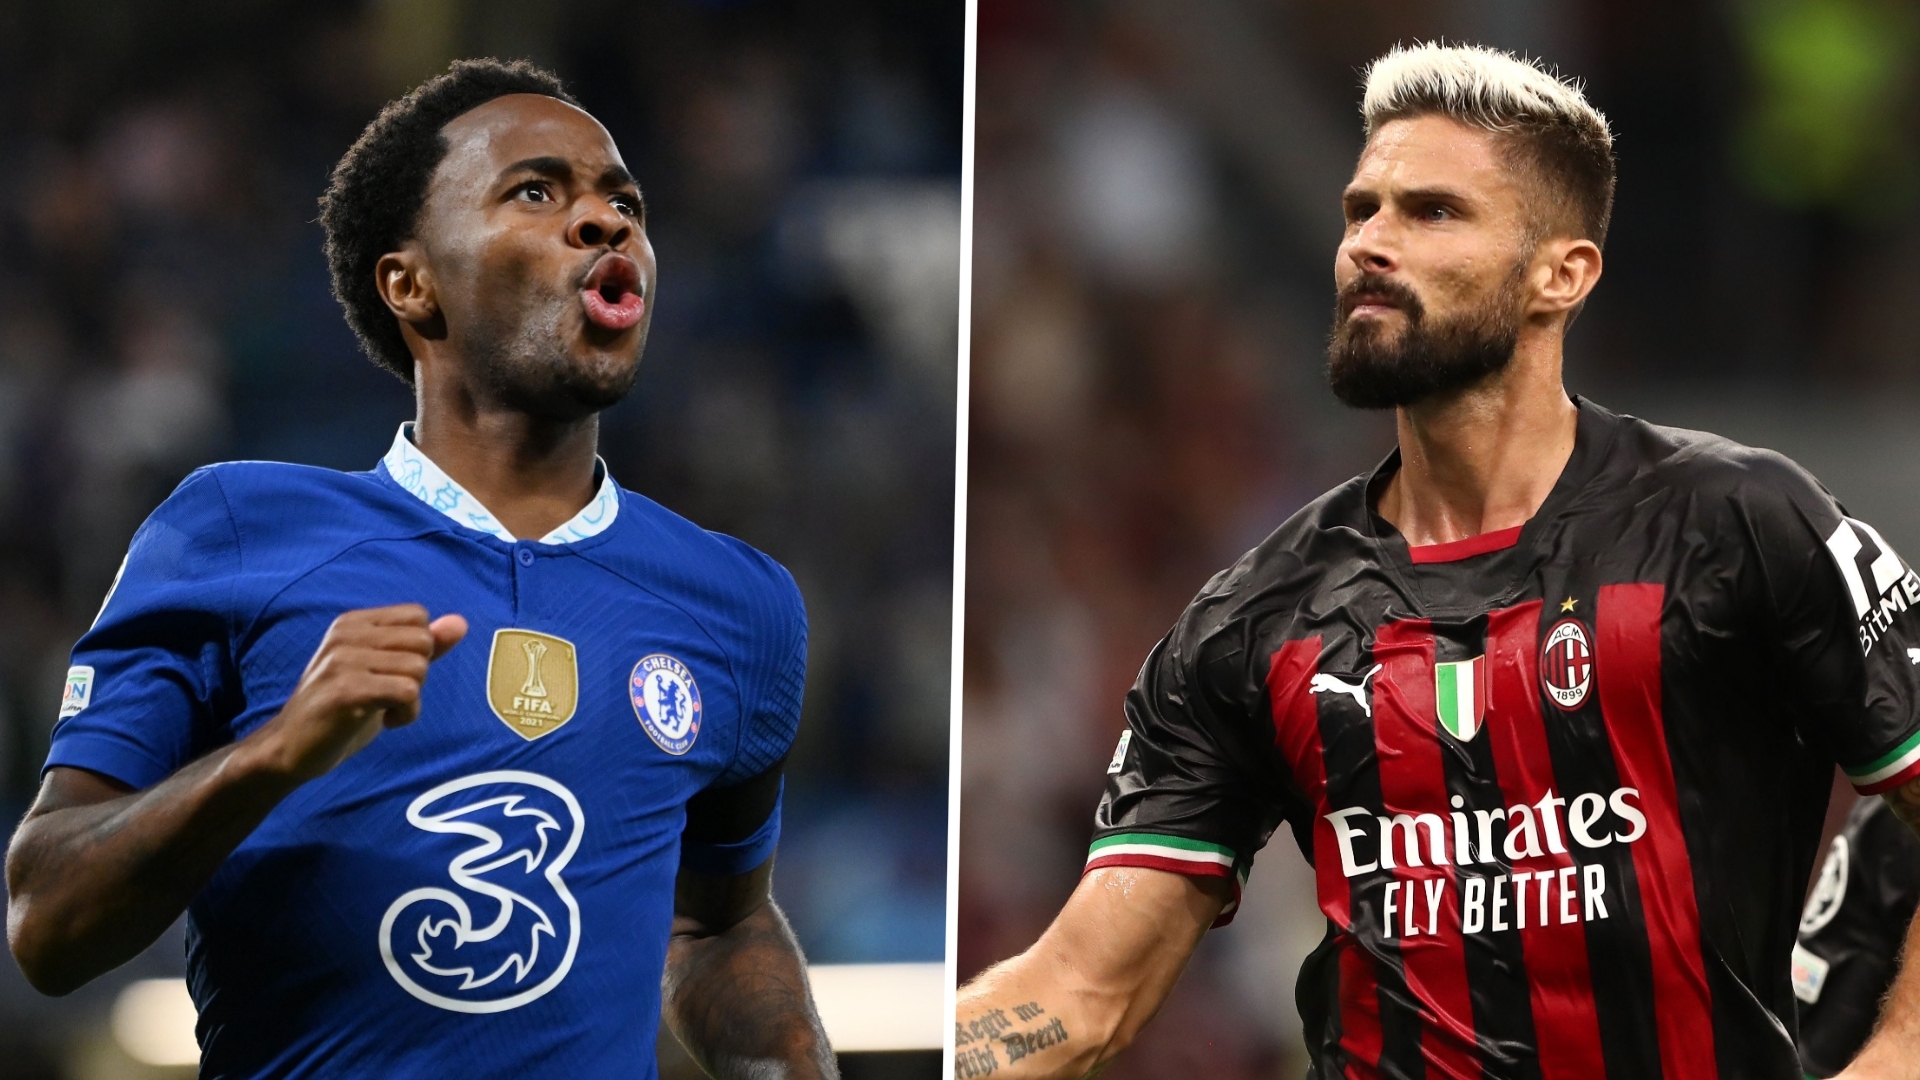 Chelsea Vs AC Milan: Live Stream UCL Match Here